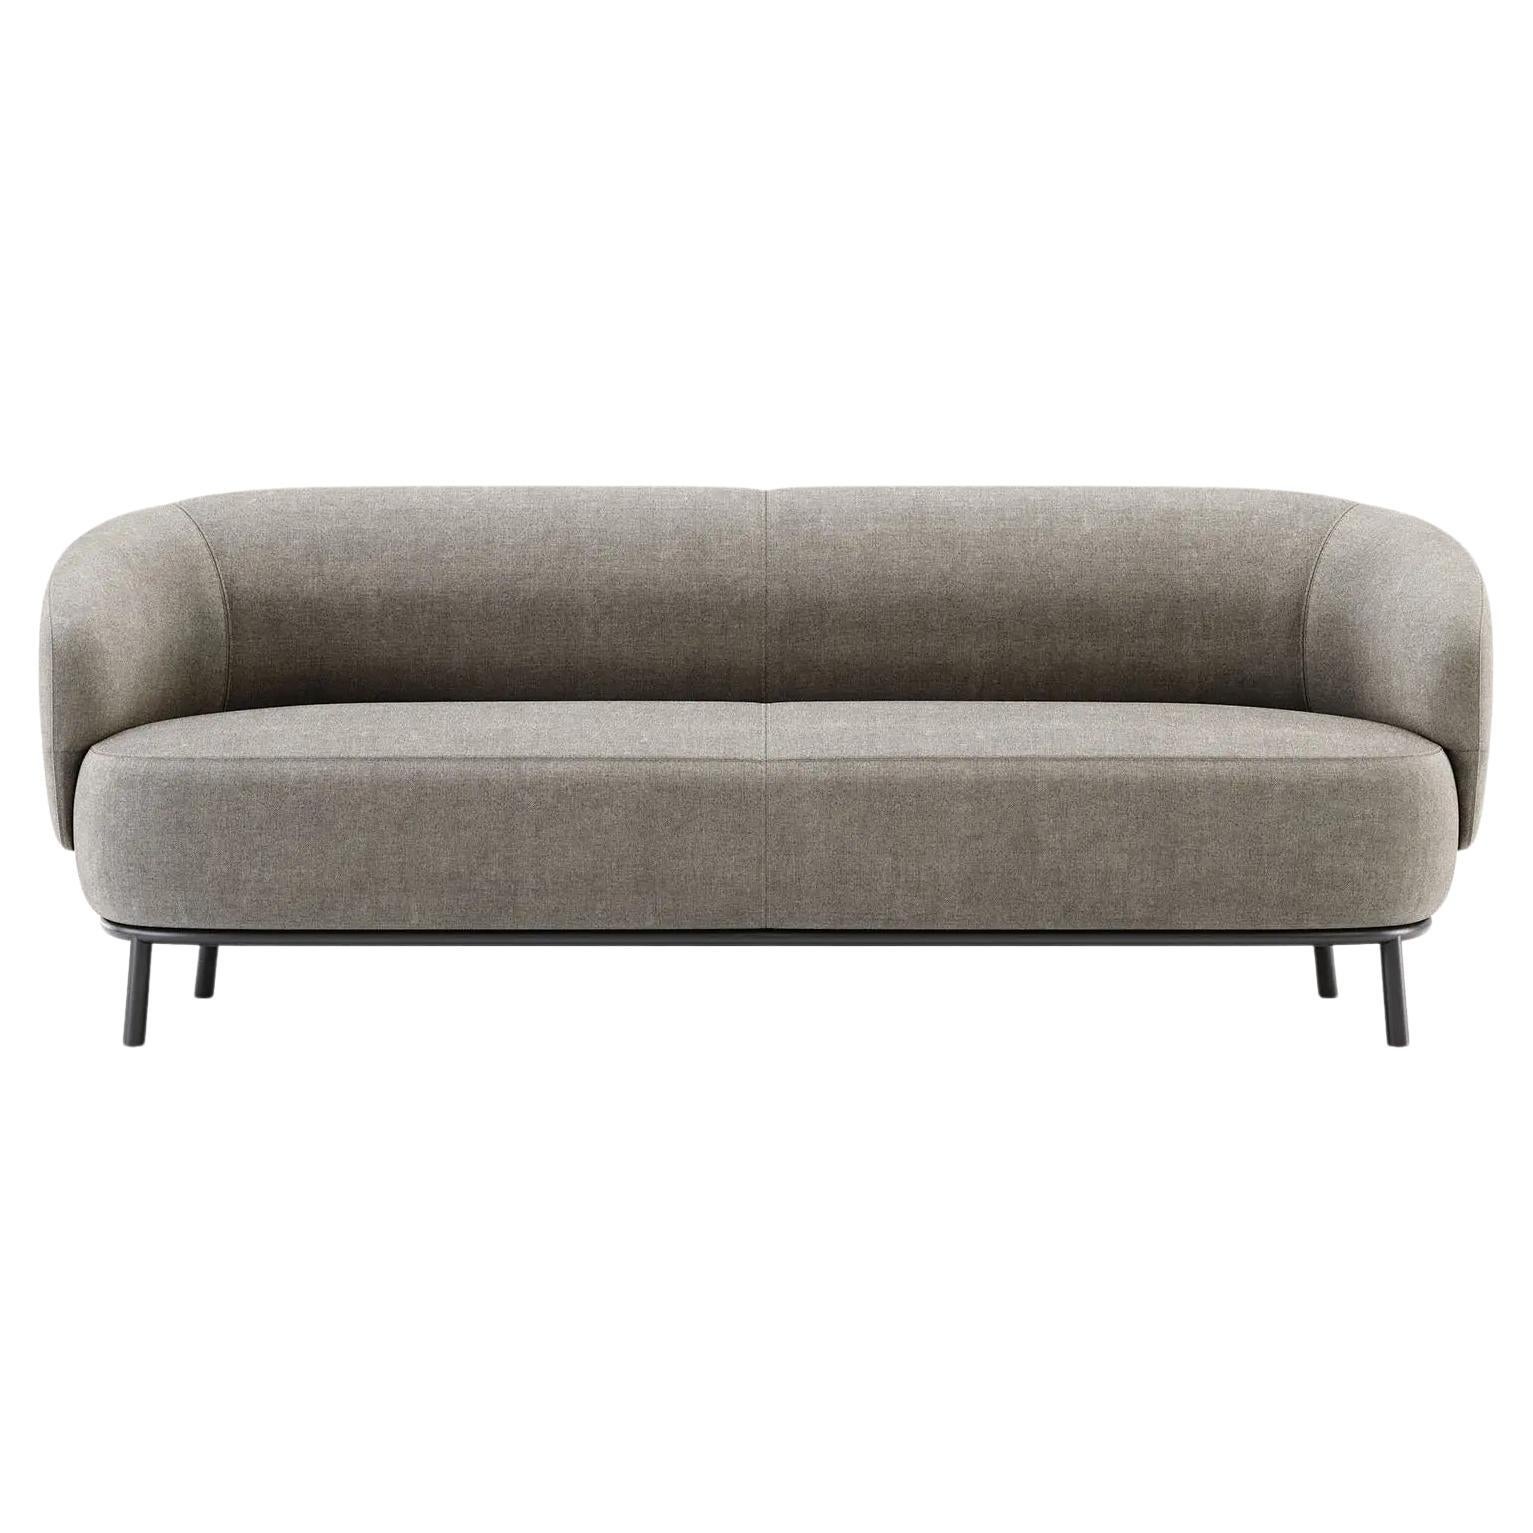 Modern Custom Made Sofa Featuring Horizontal Bands of Haute-Couture Stitching. For Sale